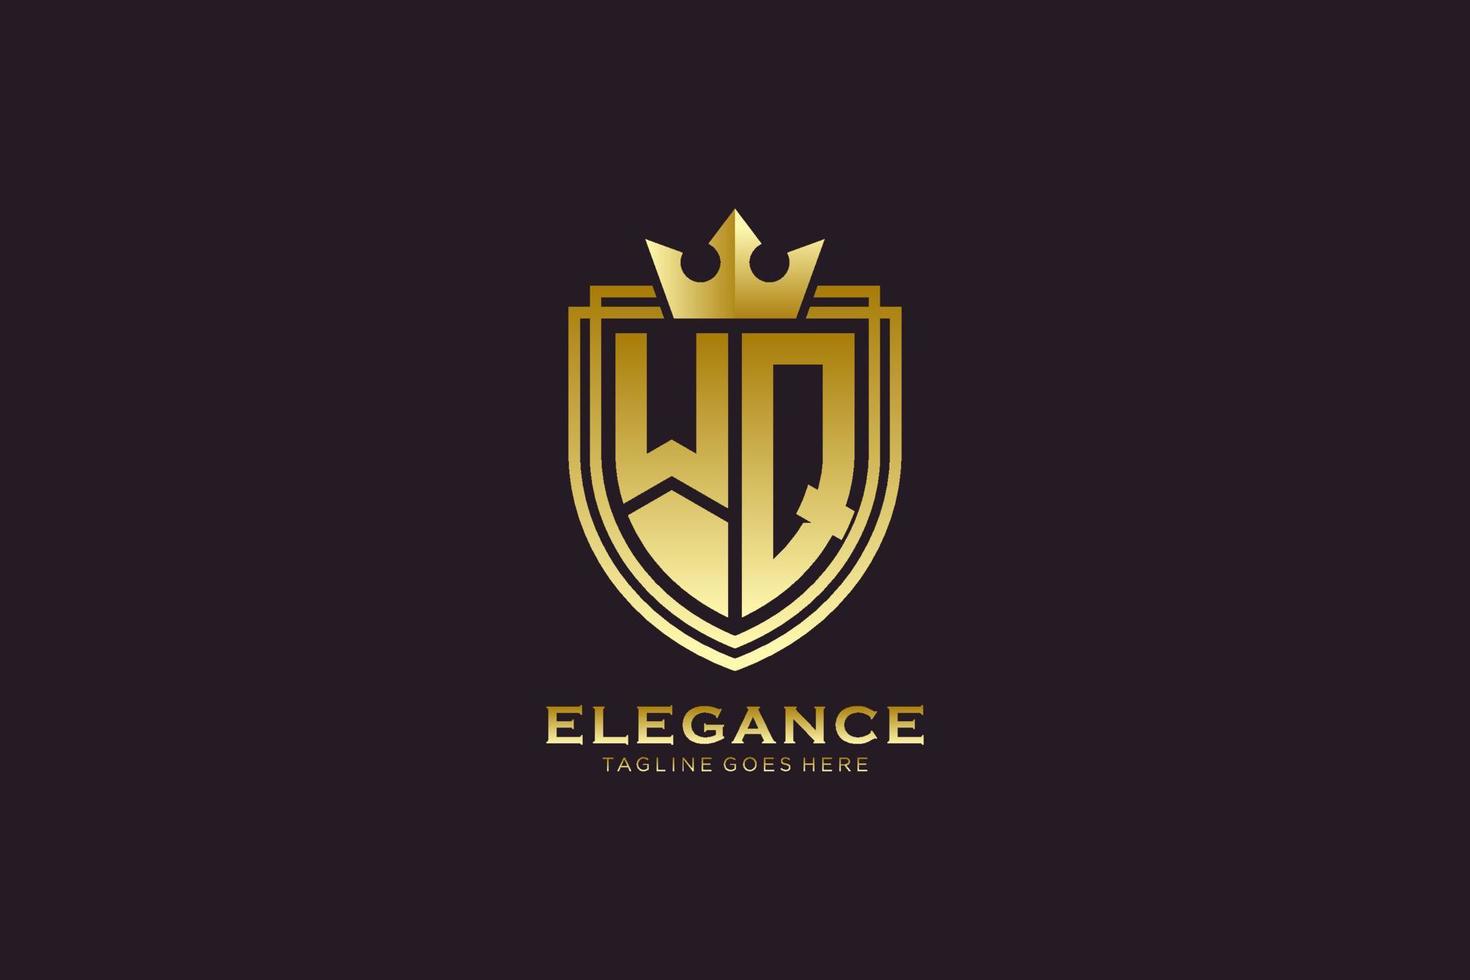 initial WQ elegant luxury monogram logo or badge template with scrolls and royal crown - perfect for luxurious branding projects vector